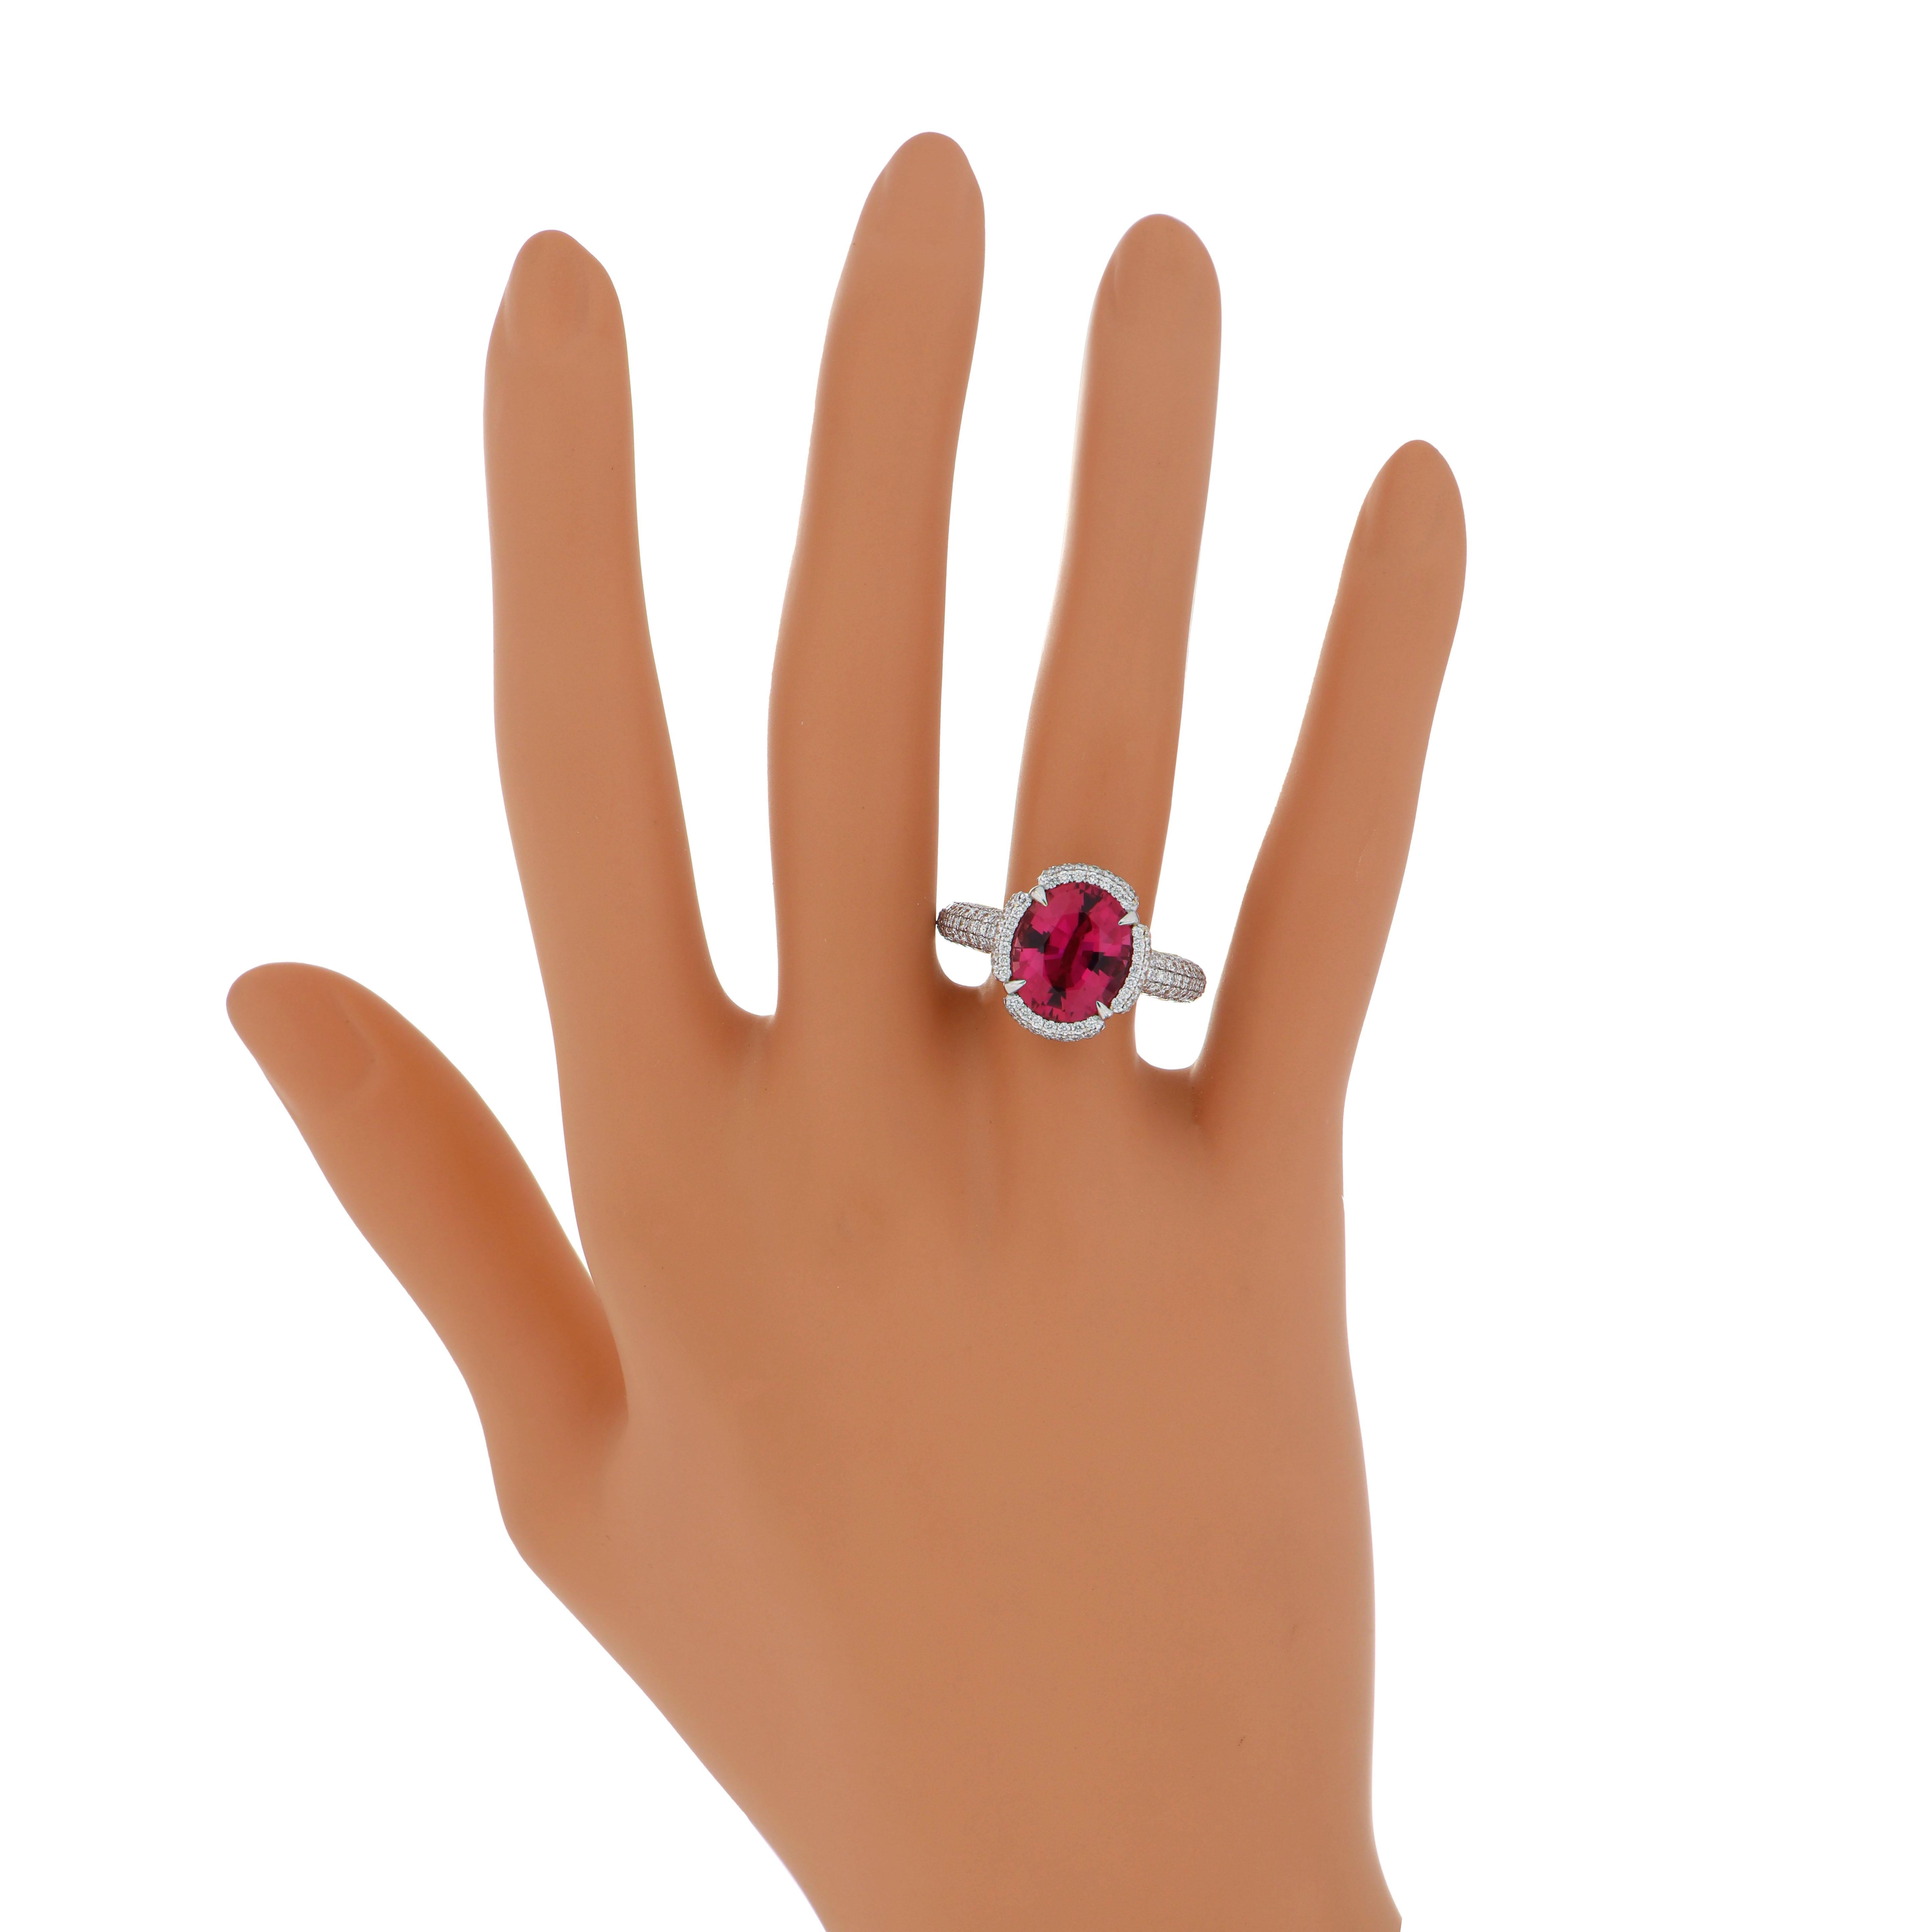 4.3 Carat Rubellite and Diamond Studded Ring in 18K White Gold Ring For Sale 3